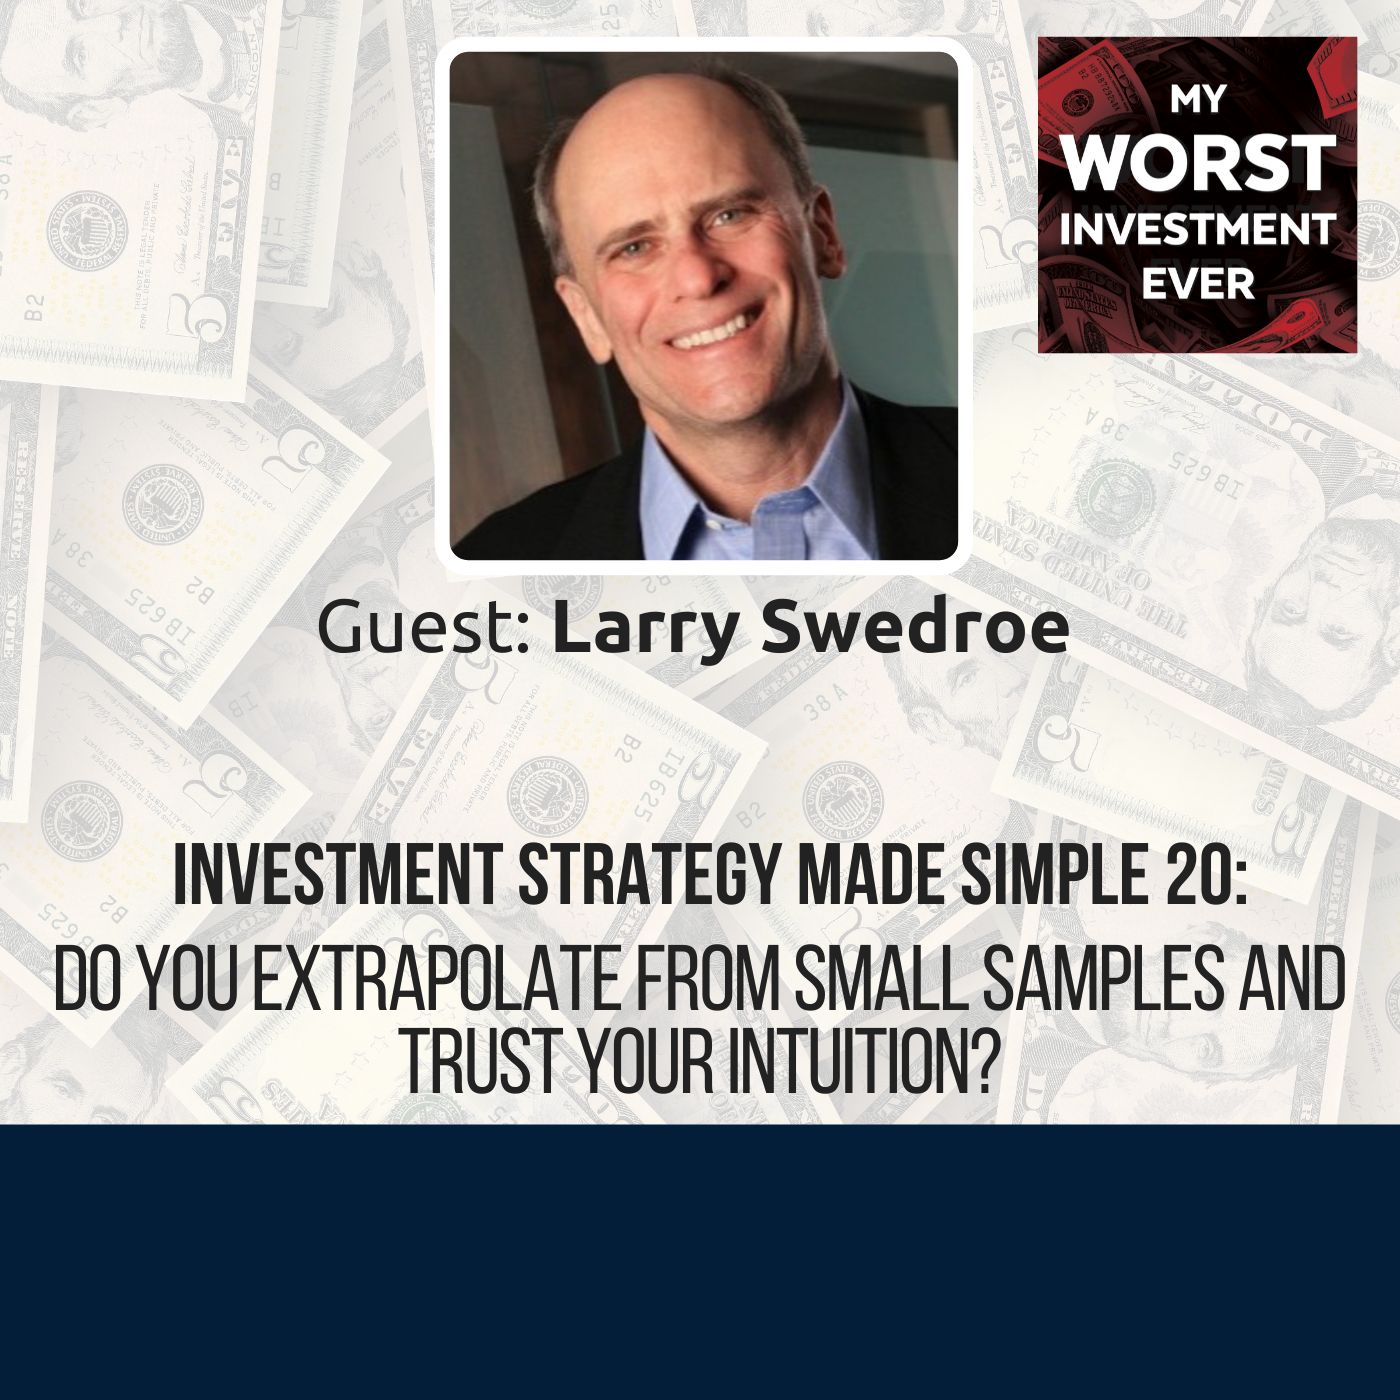 ISMS 20: Larry Swedroe – Do You Extrapolate From Small Samples and Trust Your Intuition?